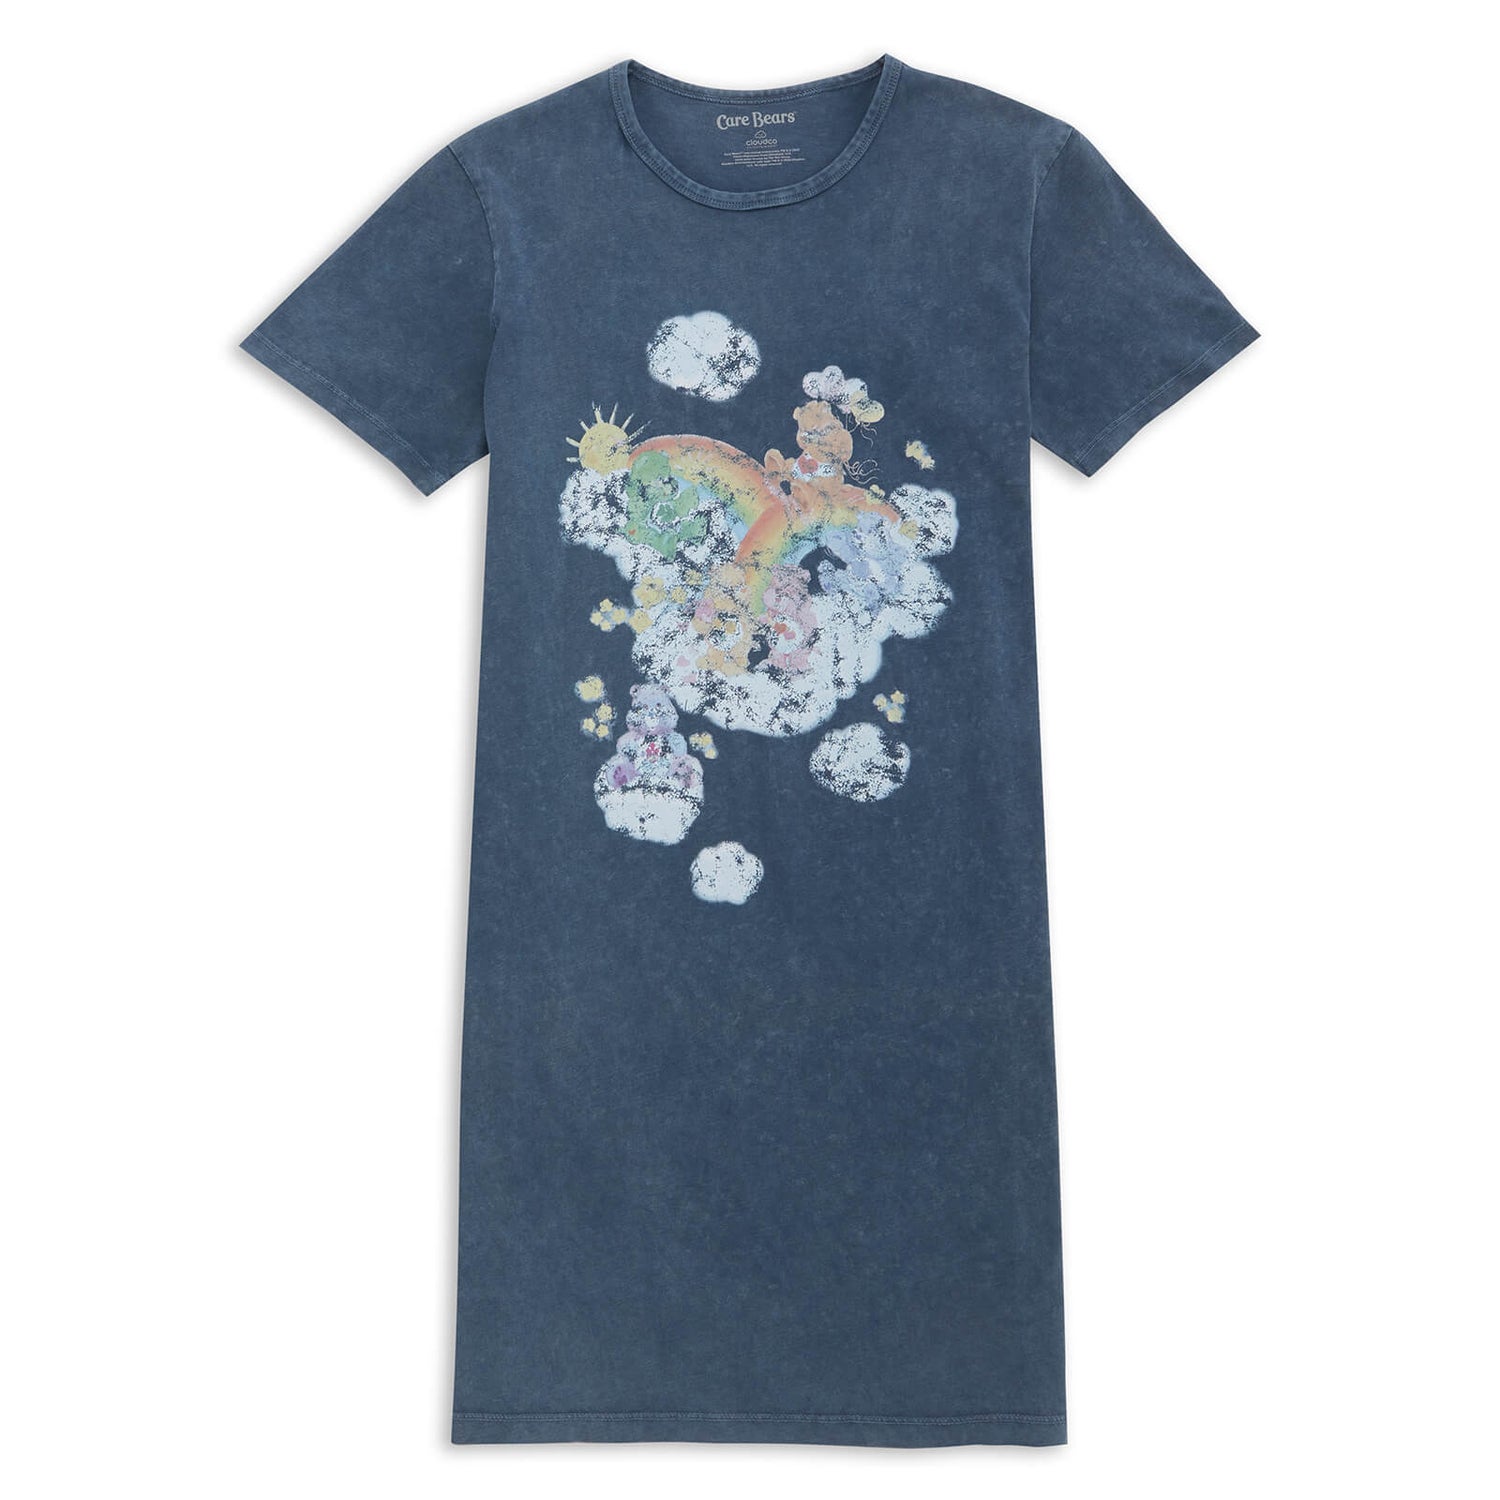 Care Bears In The Clouds Women's T-Shirt Dress - Navy Acid Wash